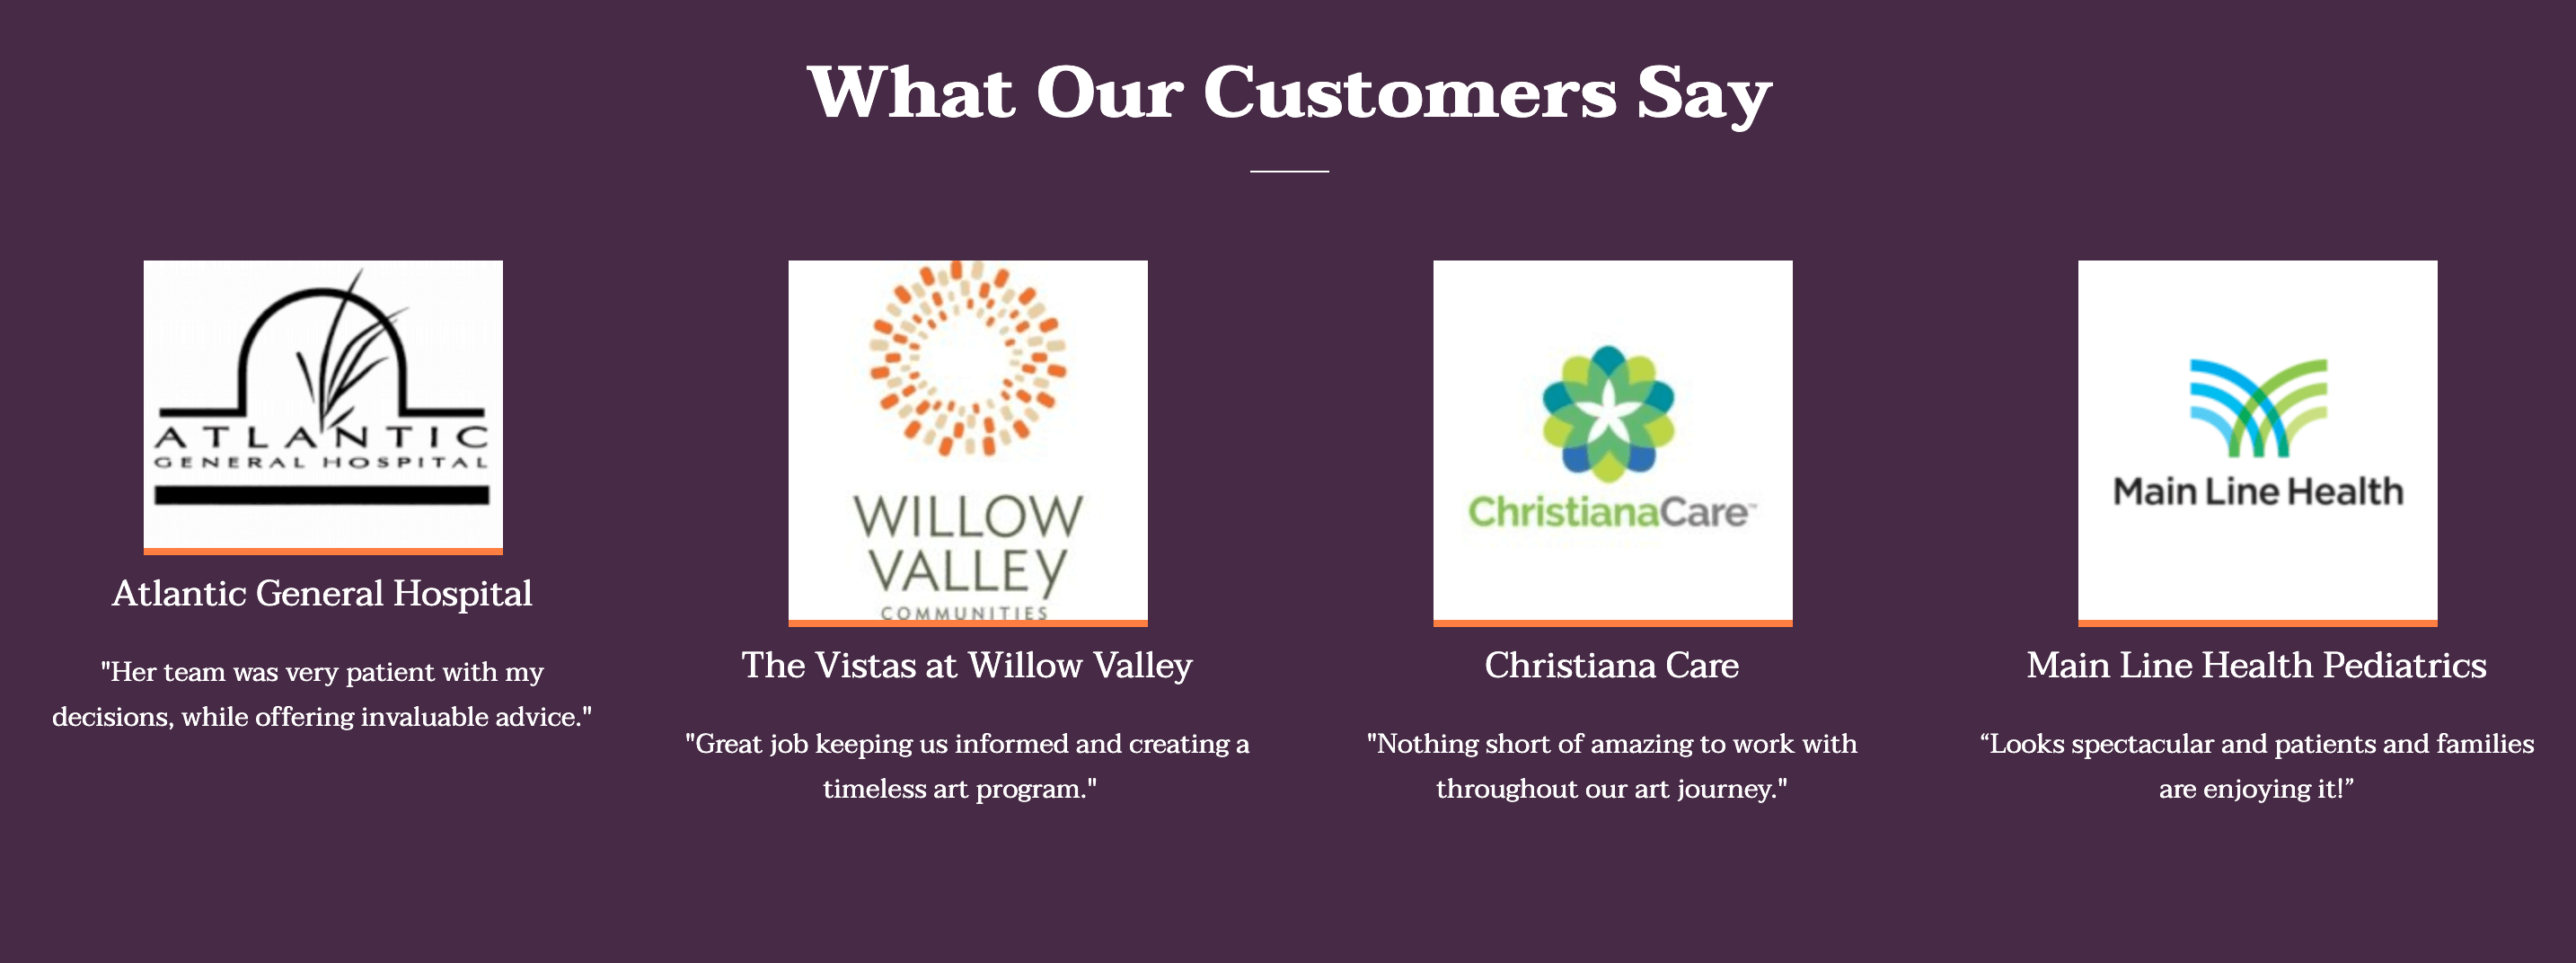 What Our Customers Say - Screenshot